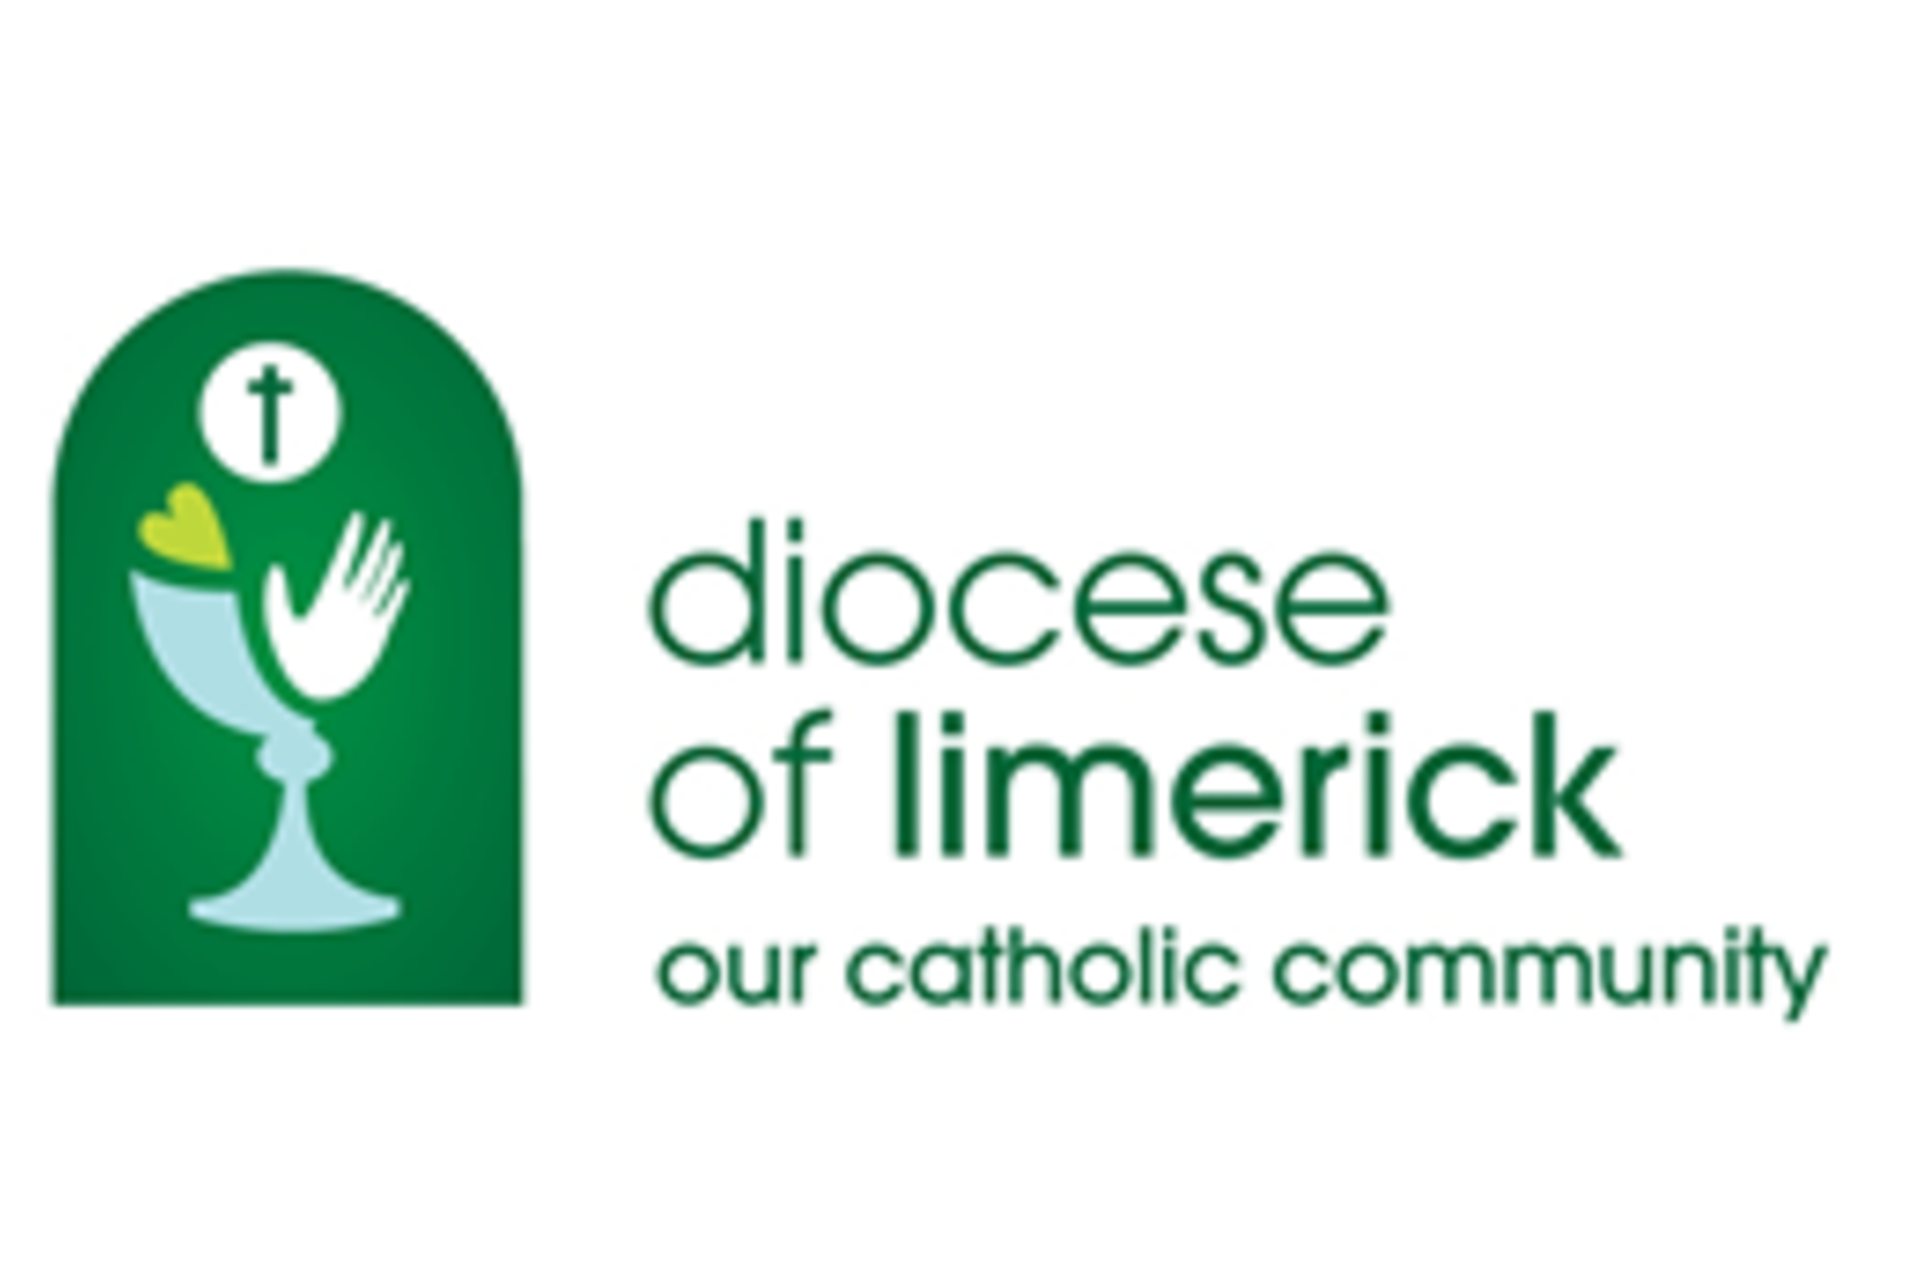 Joint Easter Message by Bishops Brendan Leahy, Catholic Bishop of Limerick, and Michael Burrows, Church of Ireland Bishop of the Diocese of Tuam, Limerick and Killaloe